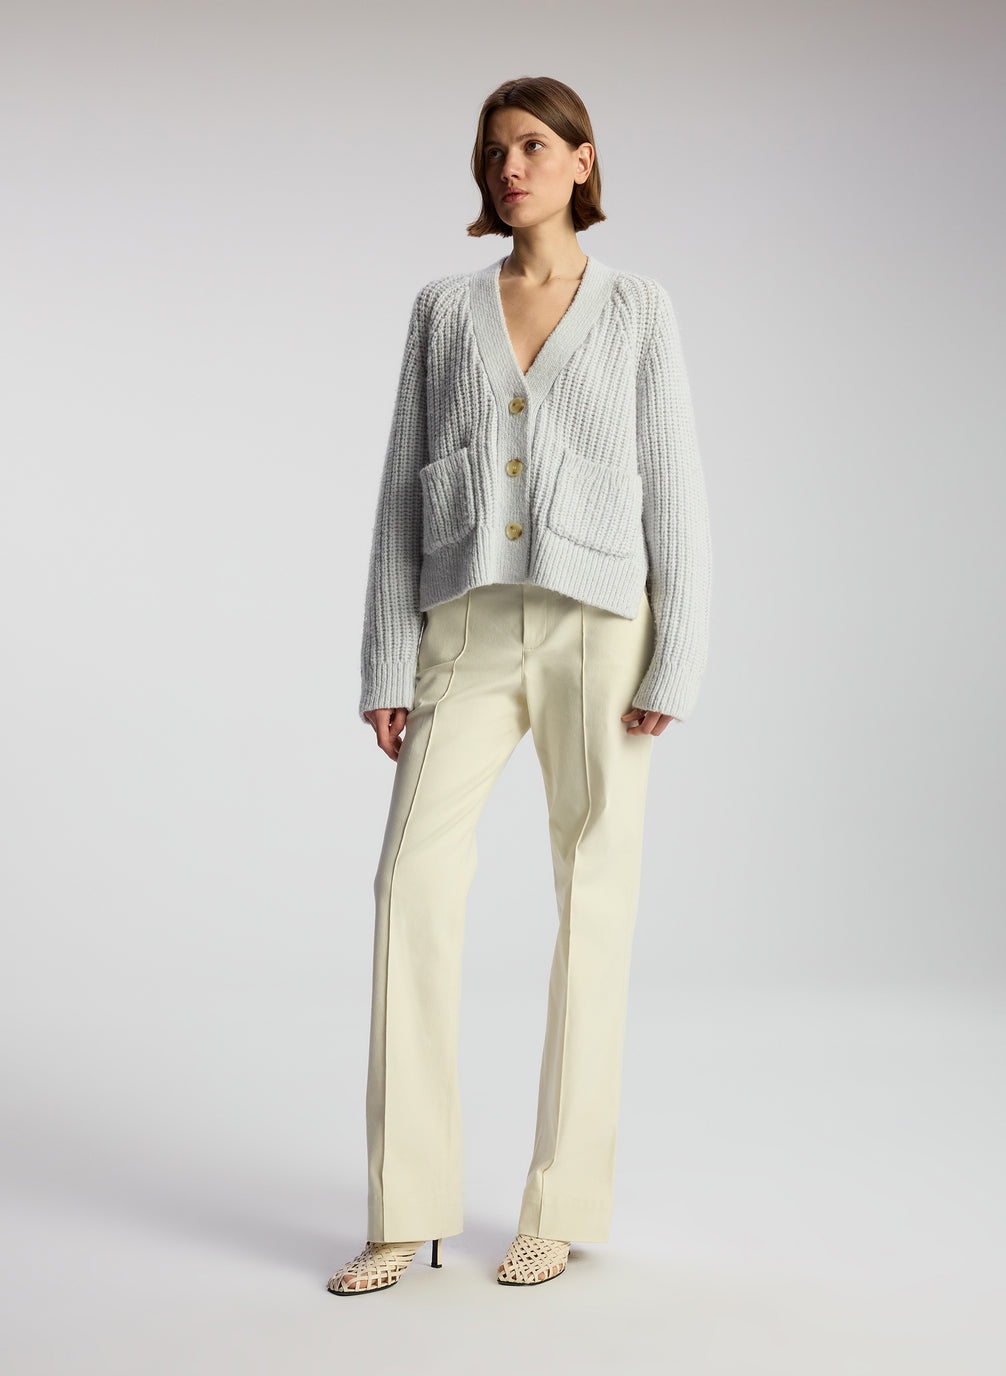 woman wearing beige pants and blue cardigan